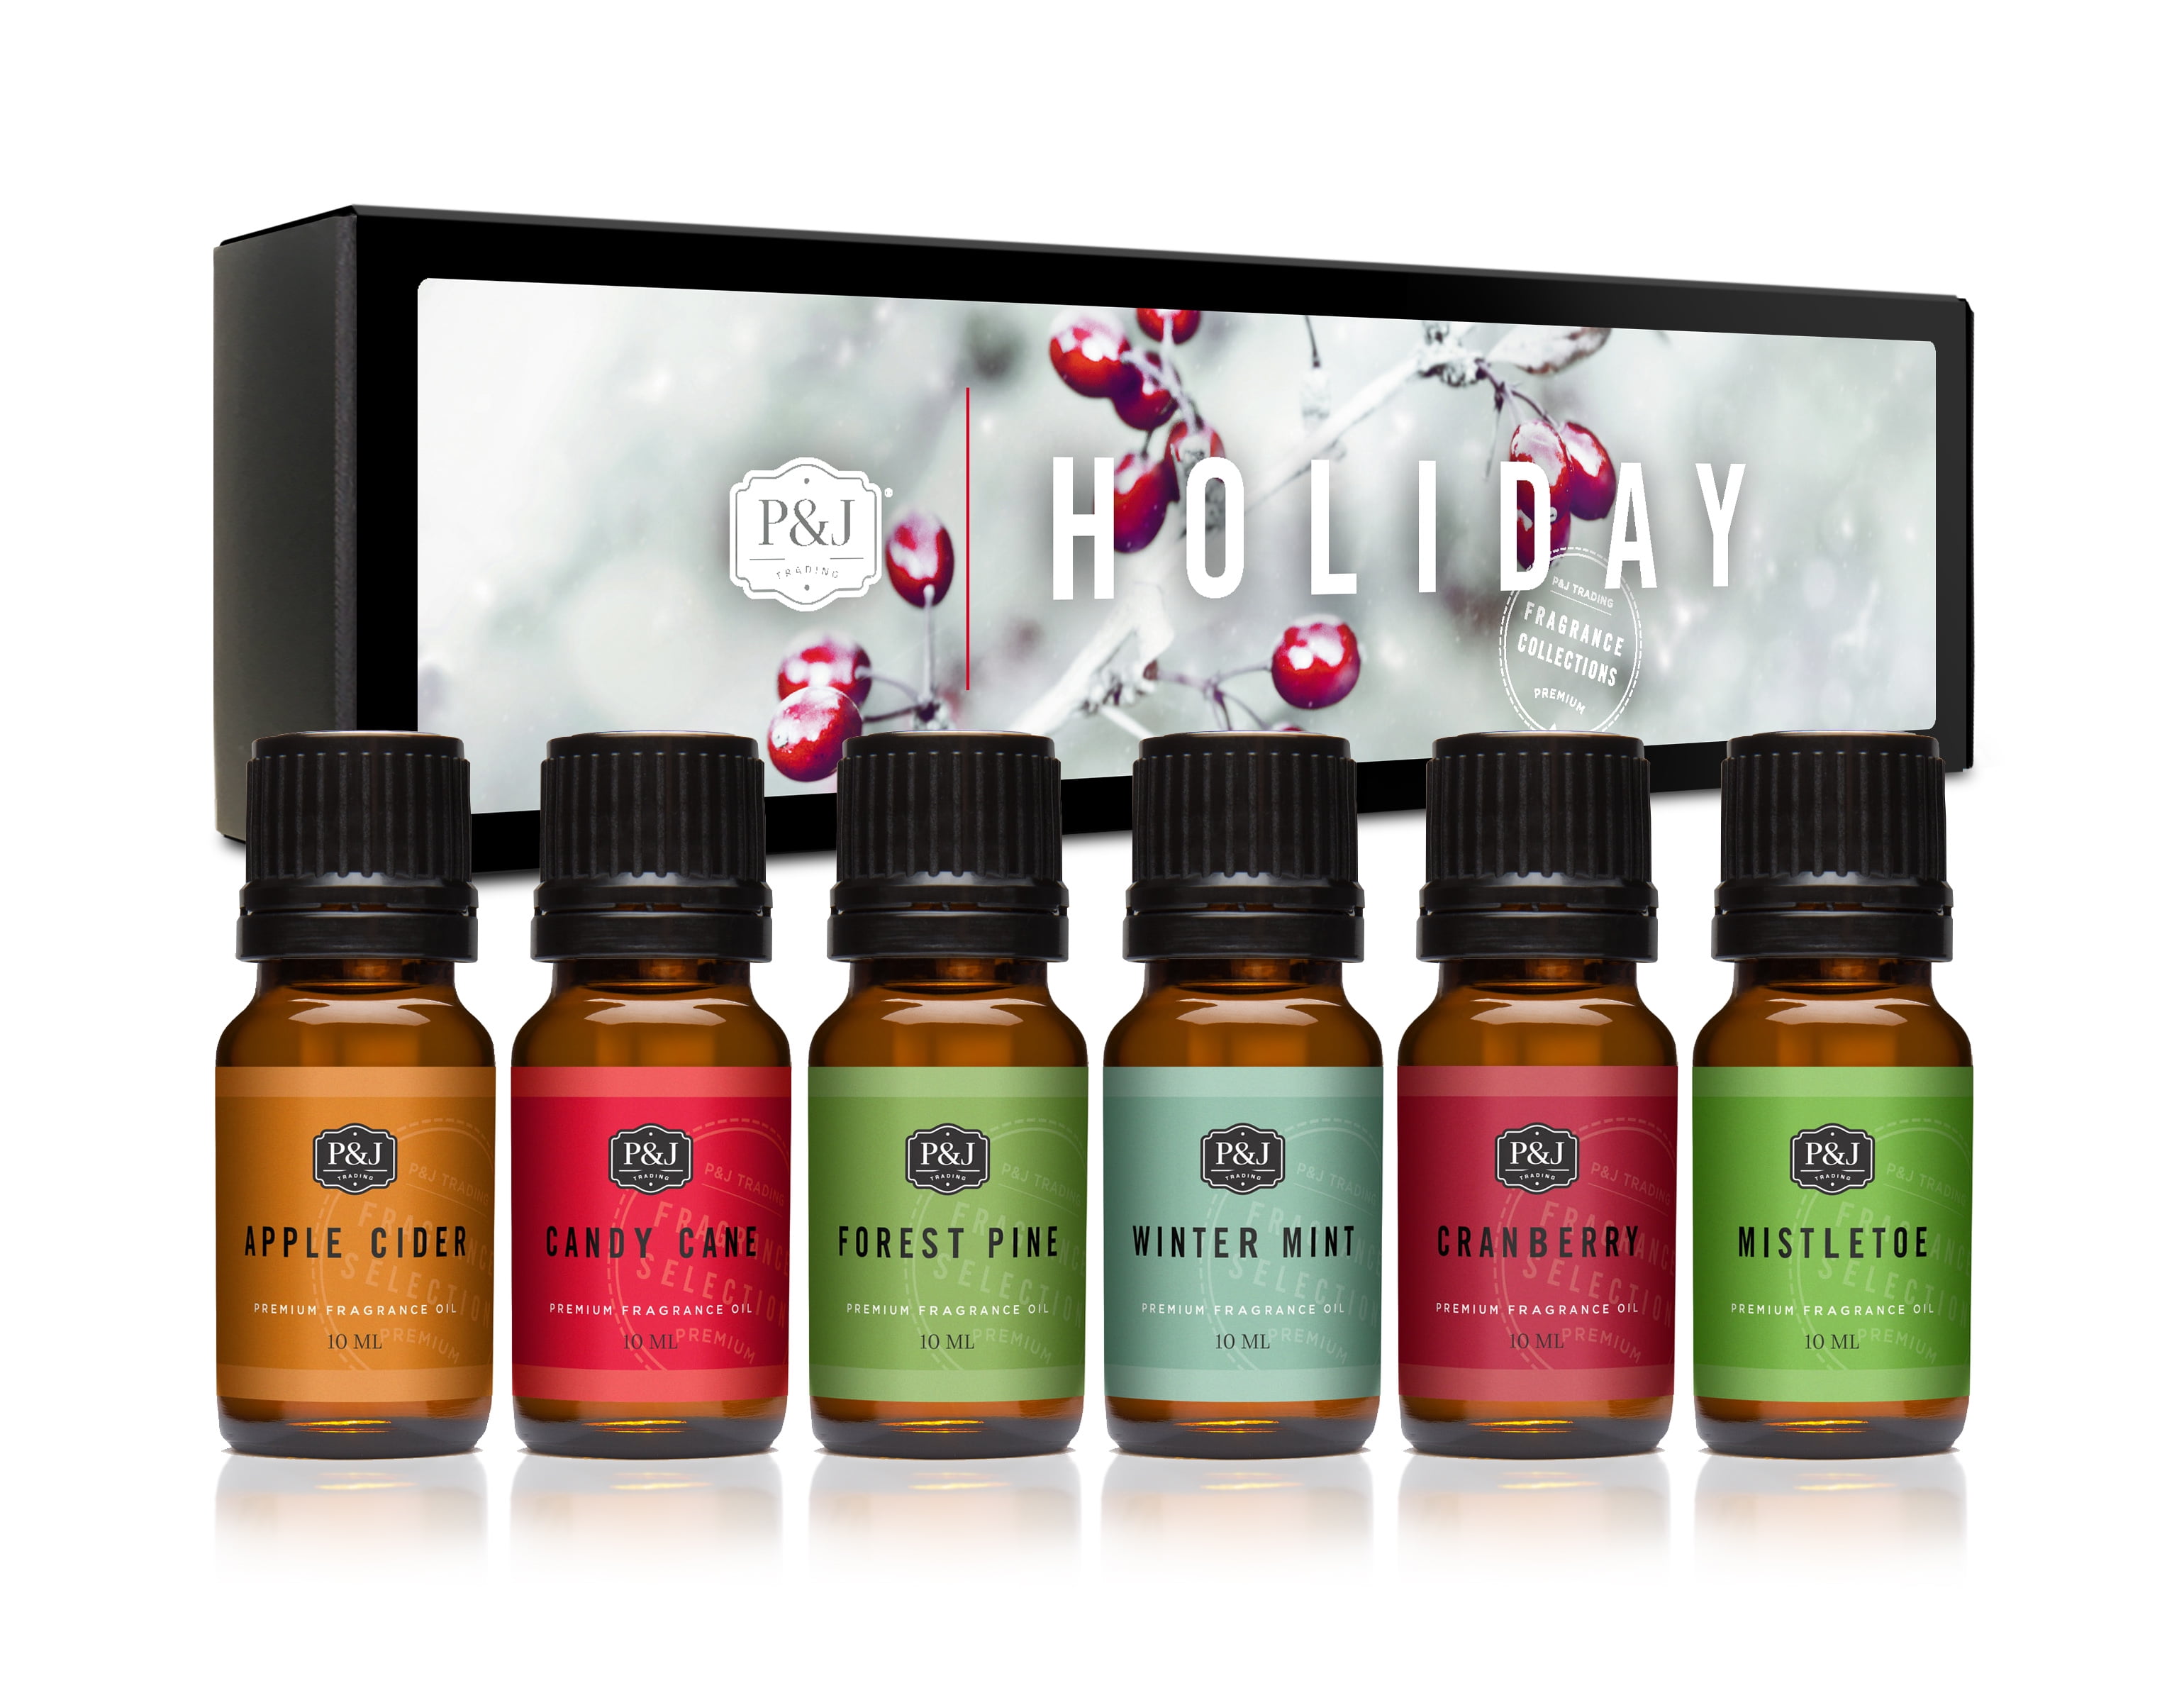 P&J Fragrance Oil | Holiday Set of 6 - Scented Oil for Soap Making,  Diffusers, Candle Making, Lotions, Haircare, Slime, and Home Fragrance